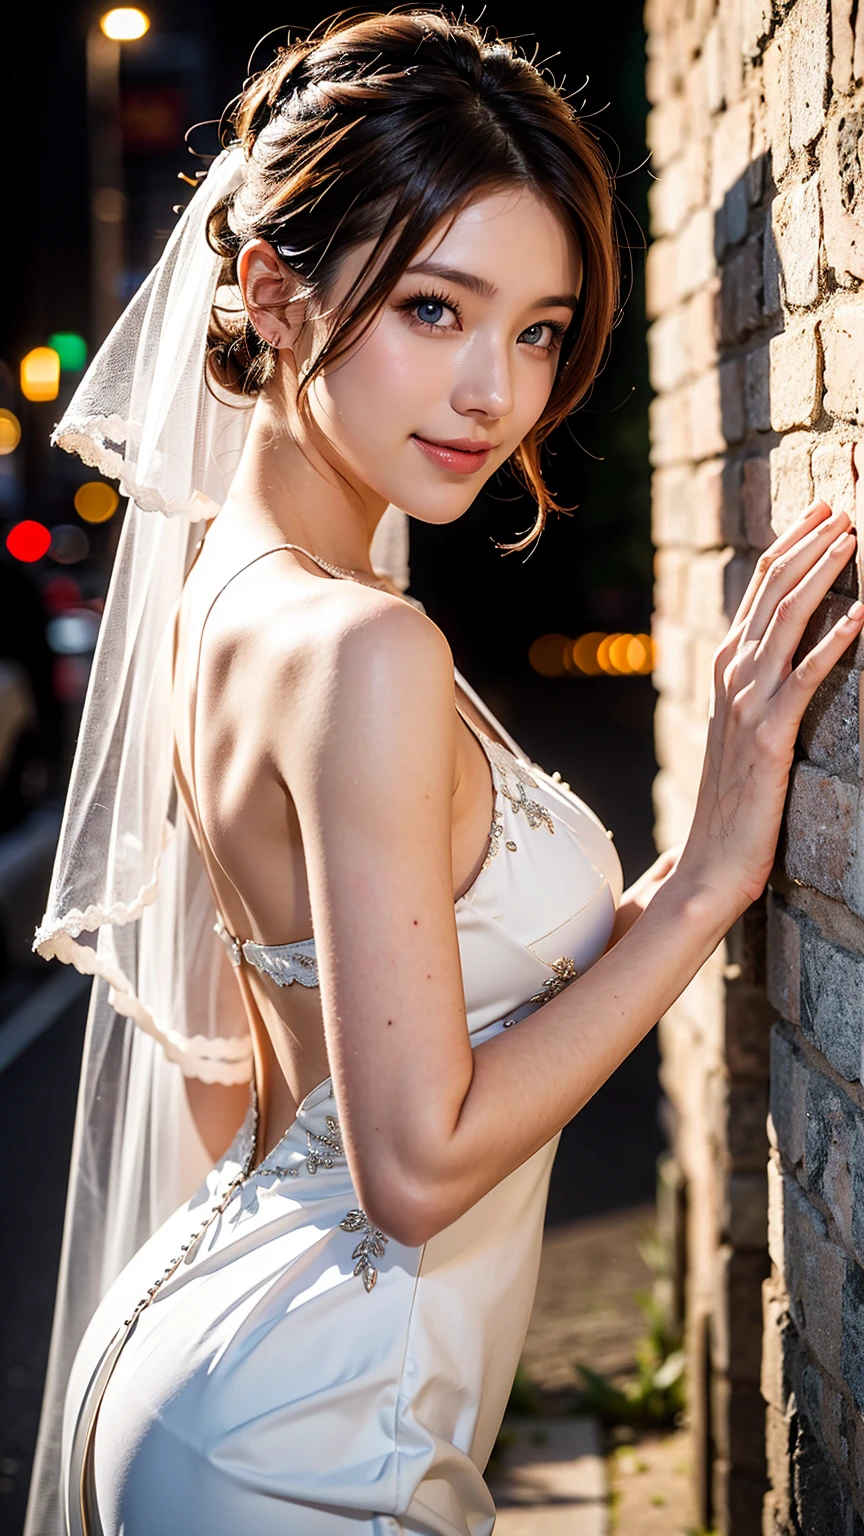 bride、Wedding Style、wedding style photos、Luxury dresses、church、Light clothing、Formal Wear、night scene、illumination、Blue eyes、bionde、short hair、Hair tied up、Full body photo、Sexy Face、short hair、 Complete look、(((masterpiece)))、((Highest quality))、((超Realistic))、Mature woman、Mature woman、perspective、Very detailed、The perfect temptation、Best image quality、Fine-grained image quality、beautiful、Europe, woman, French, woman Italian, Italian, smile、Blue eyes、jewelry, Blue eyes, Realistic, High resolution, Glowing Skin, (Detailed face),jewelry, , night, bionde, Wavy Hair,Attractive appearance, smile,